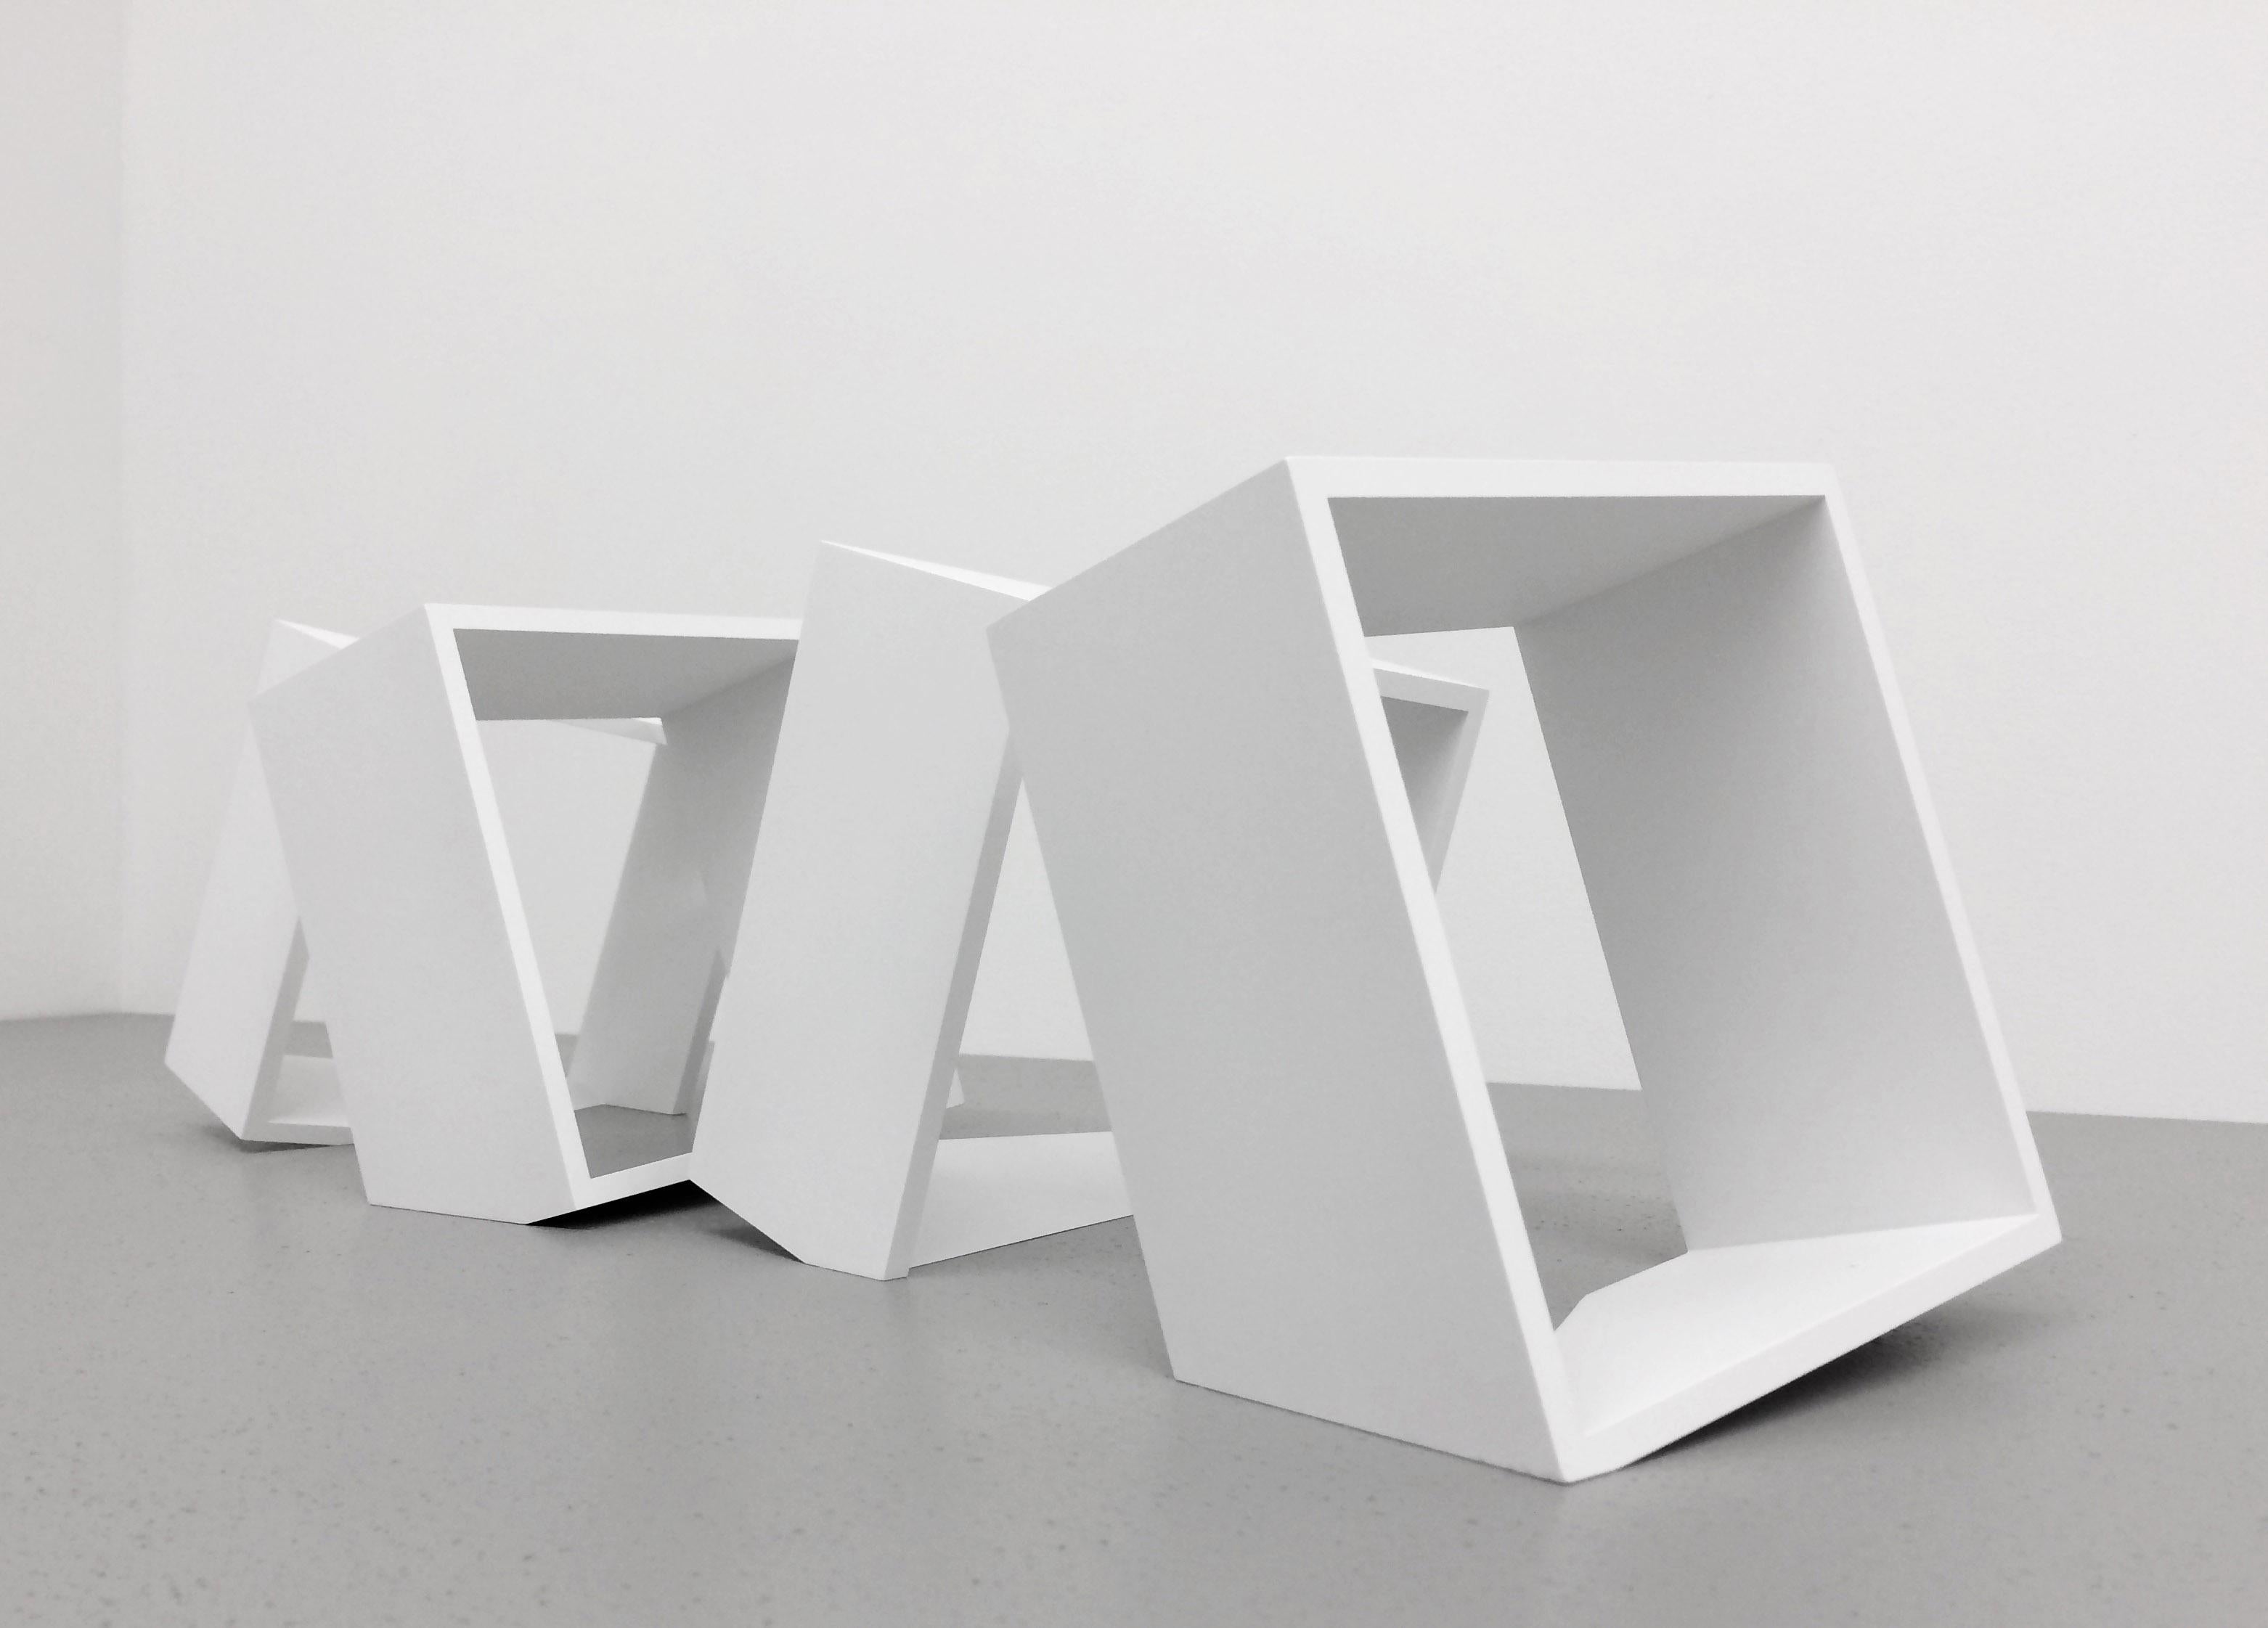 Untitled (4 white units), Geometrical Abstract Sculpture, 2018